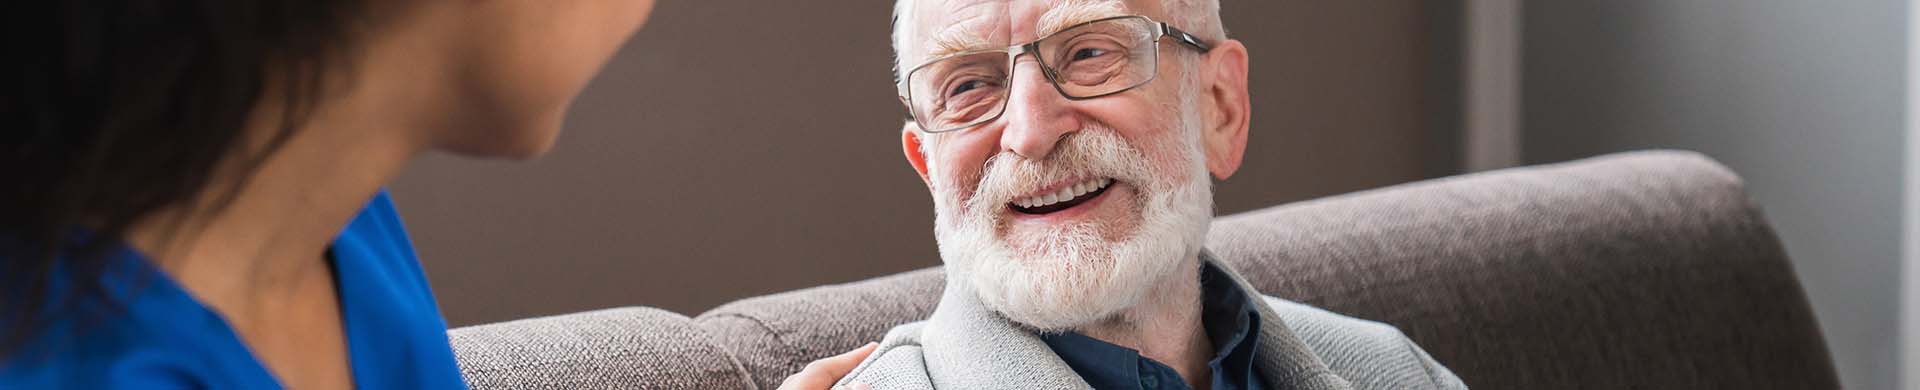 elderly man smiling while talking with a healthcare worker